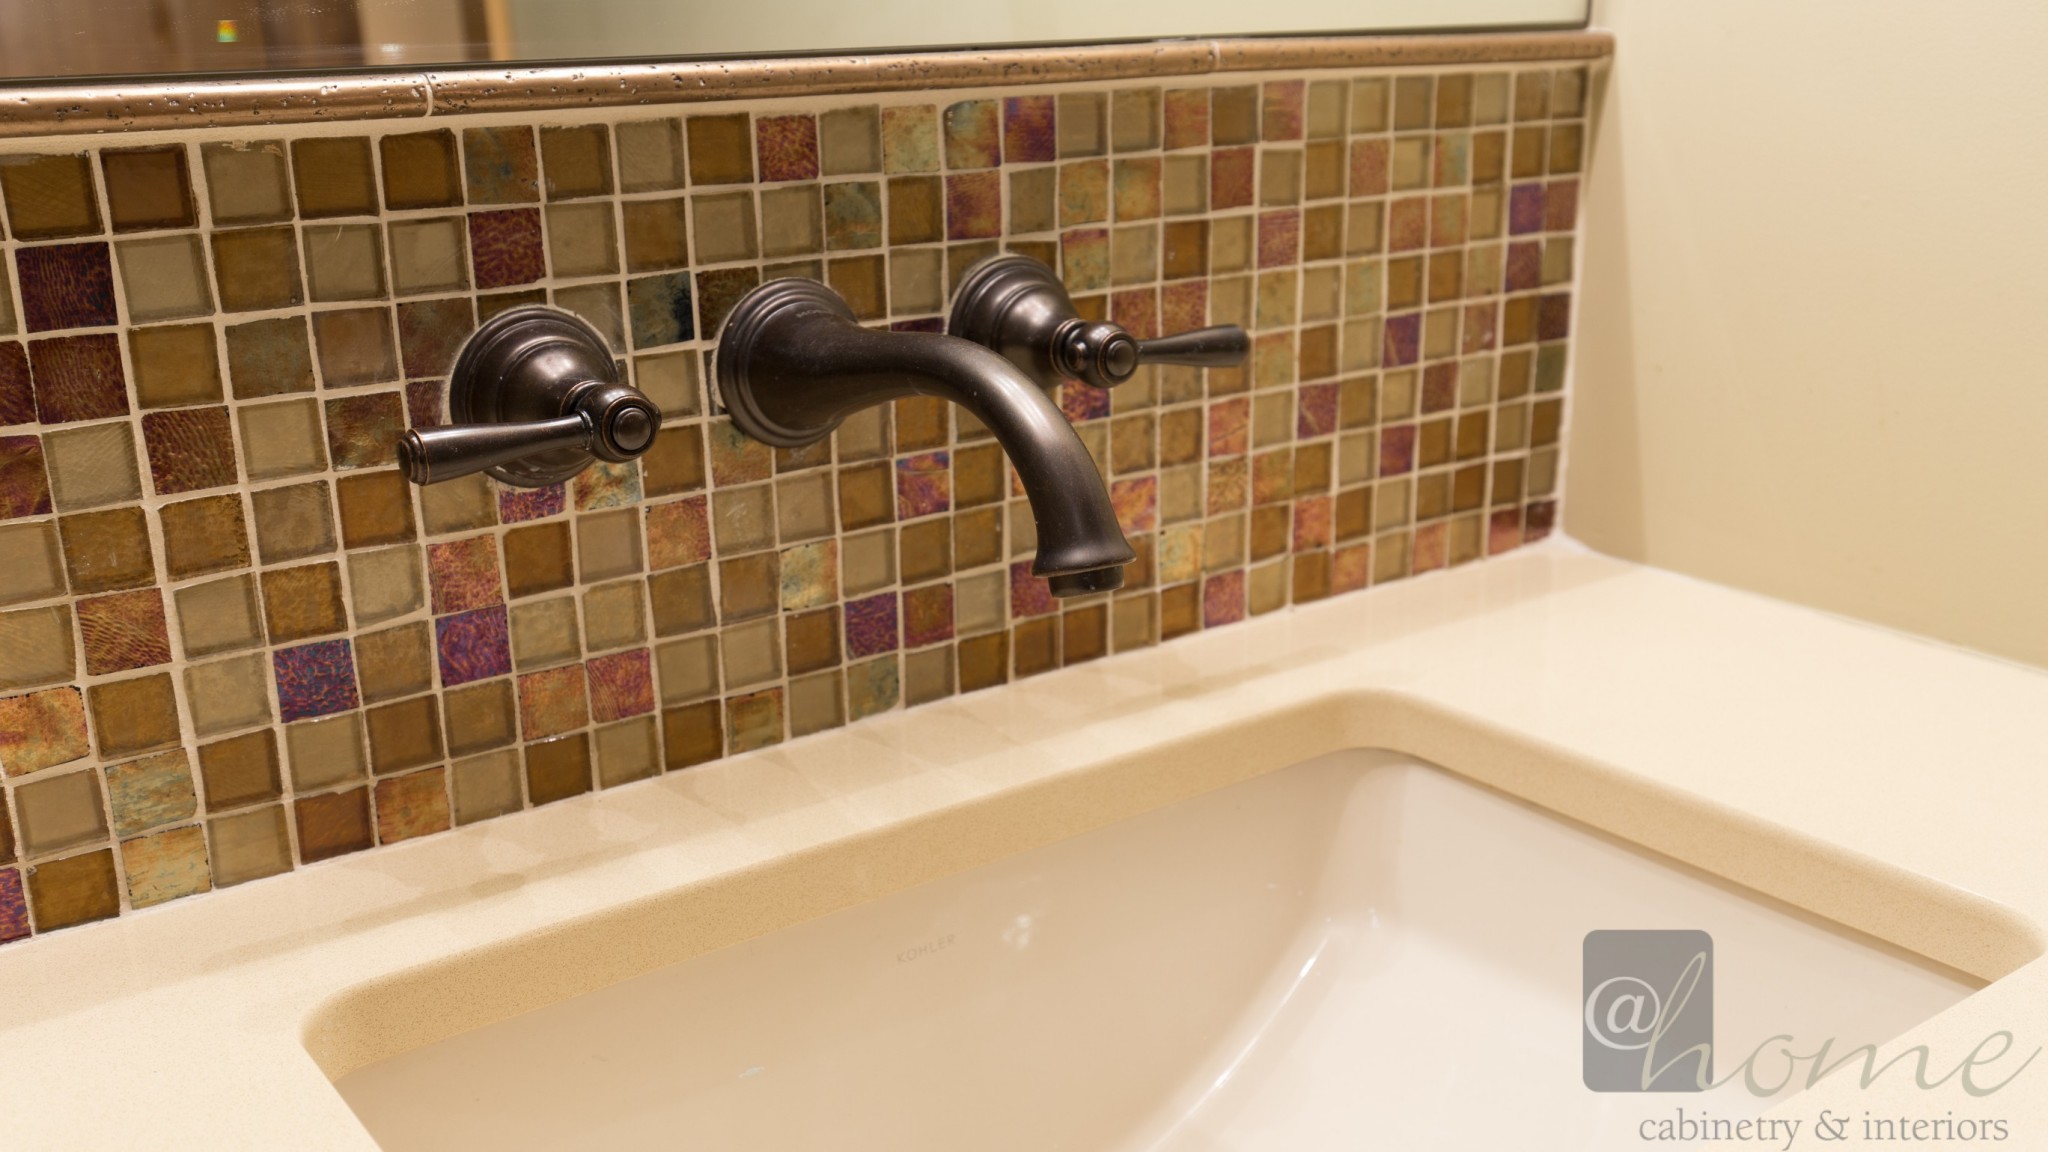 By repositioning the faucet to the wall we were able to create a shallower vanity that spanned the entire wall. It has that “wow” factor as well as provides ample storage for towels etc.